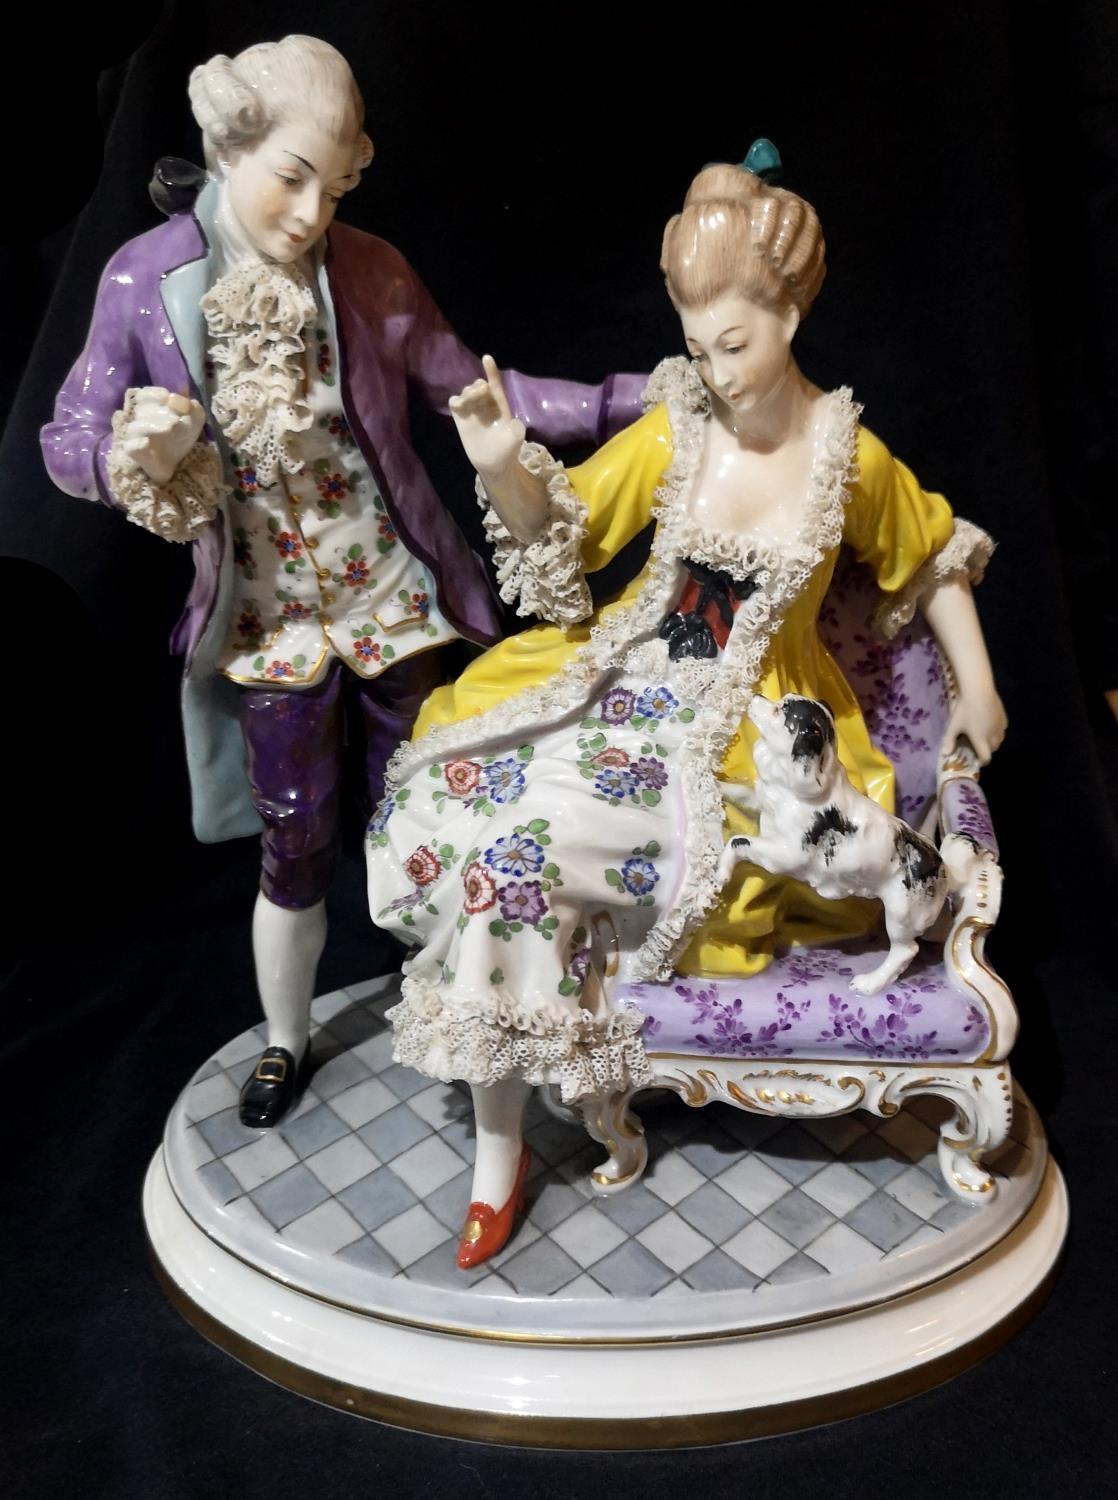 A LARGE CONTINENTAL PORCELAIN FIGURAL GROUP Courting couple in 18th Century attire, underglazed blue